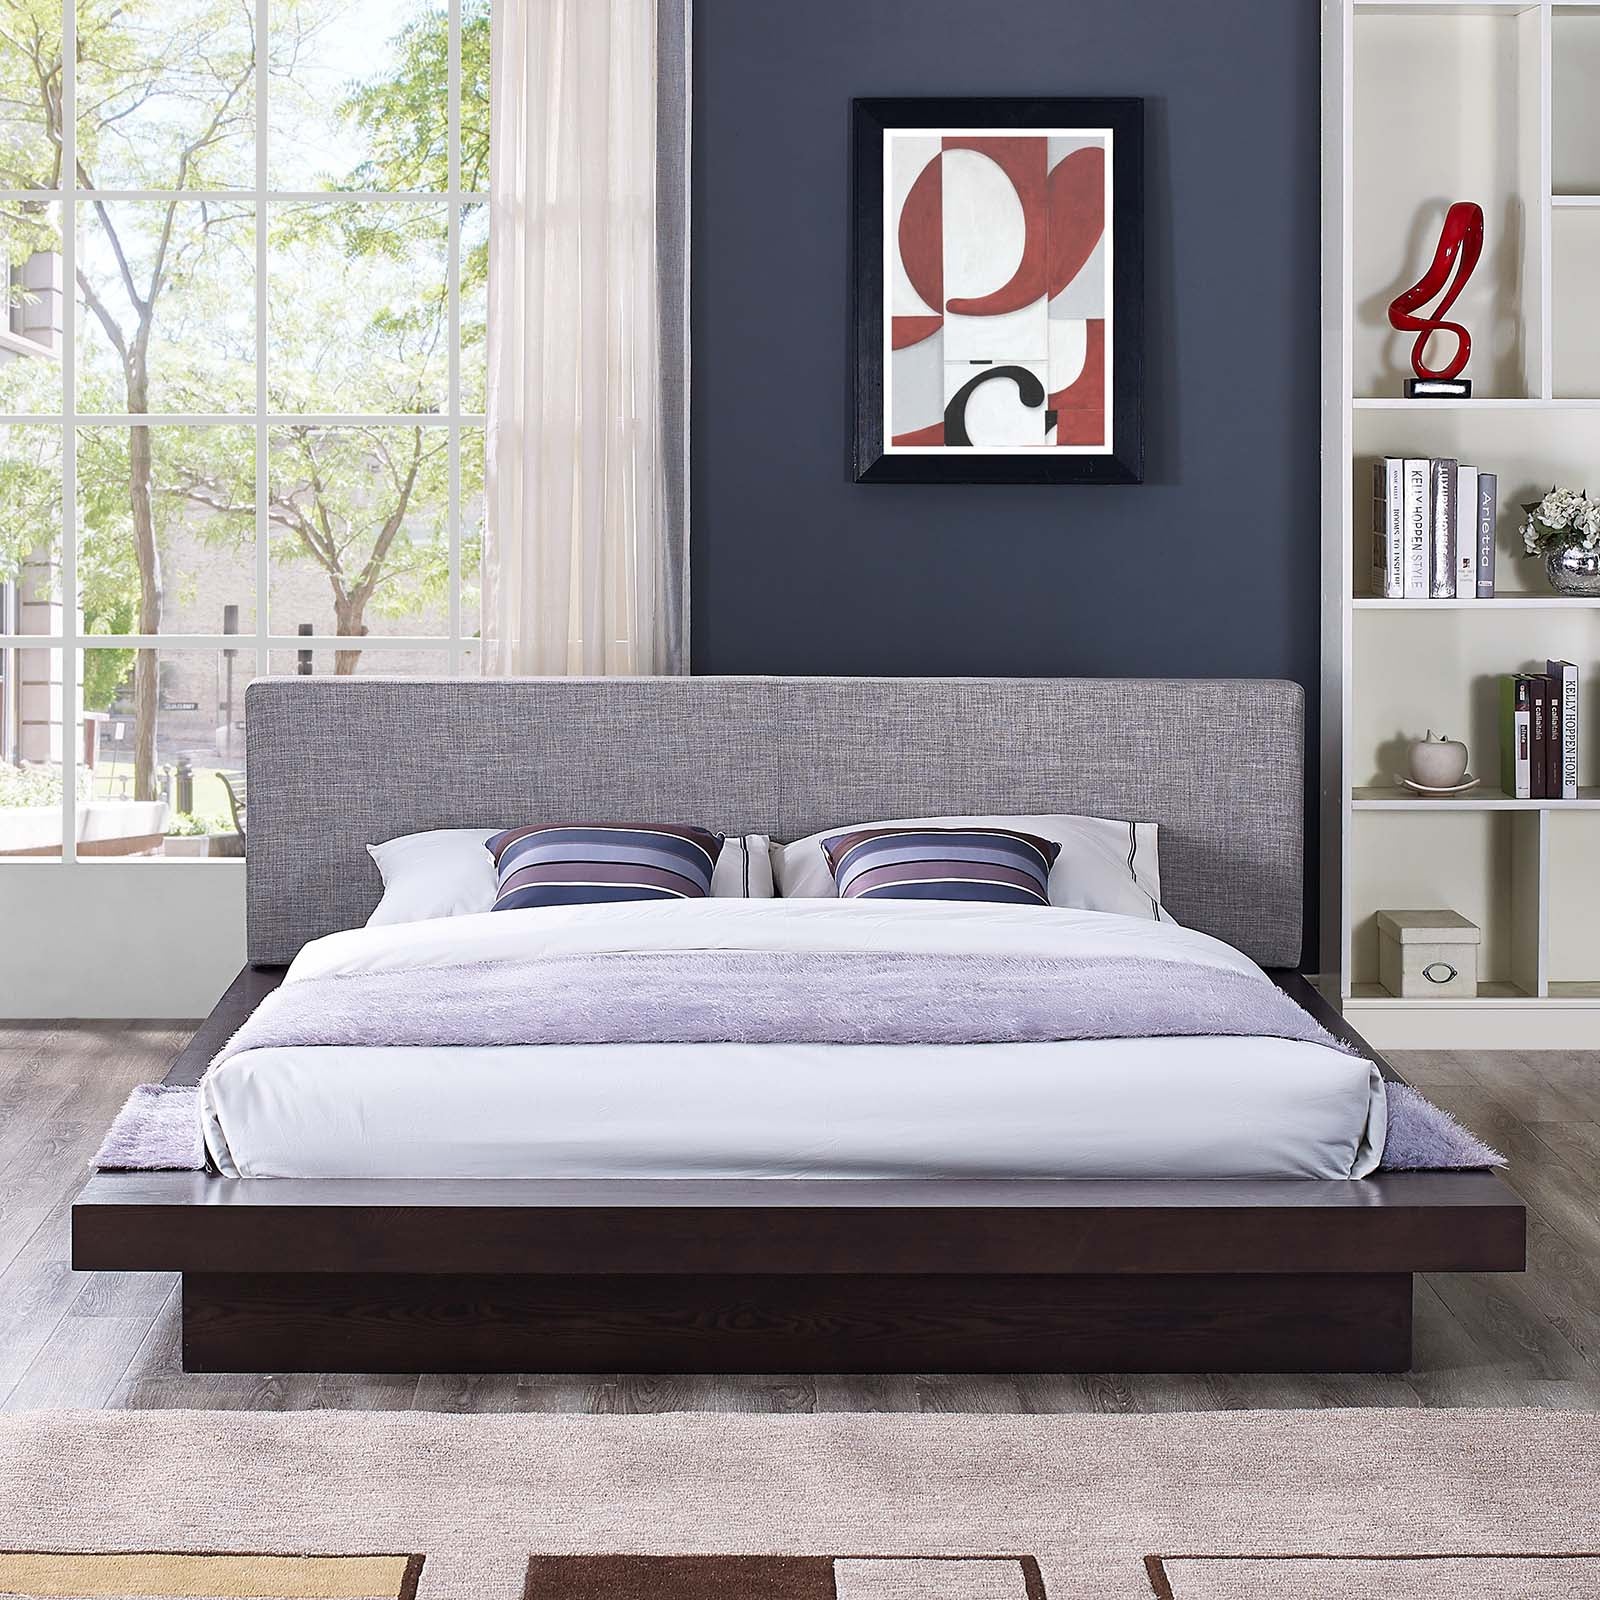 Modway Beds - Freja Queen Fabric Platform Bed Cappuccino And Gray